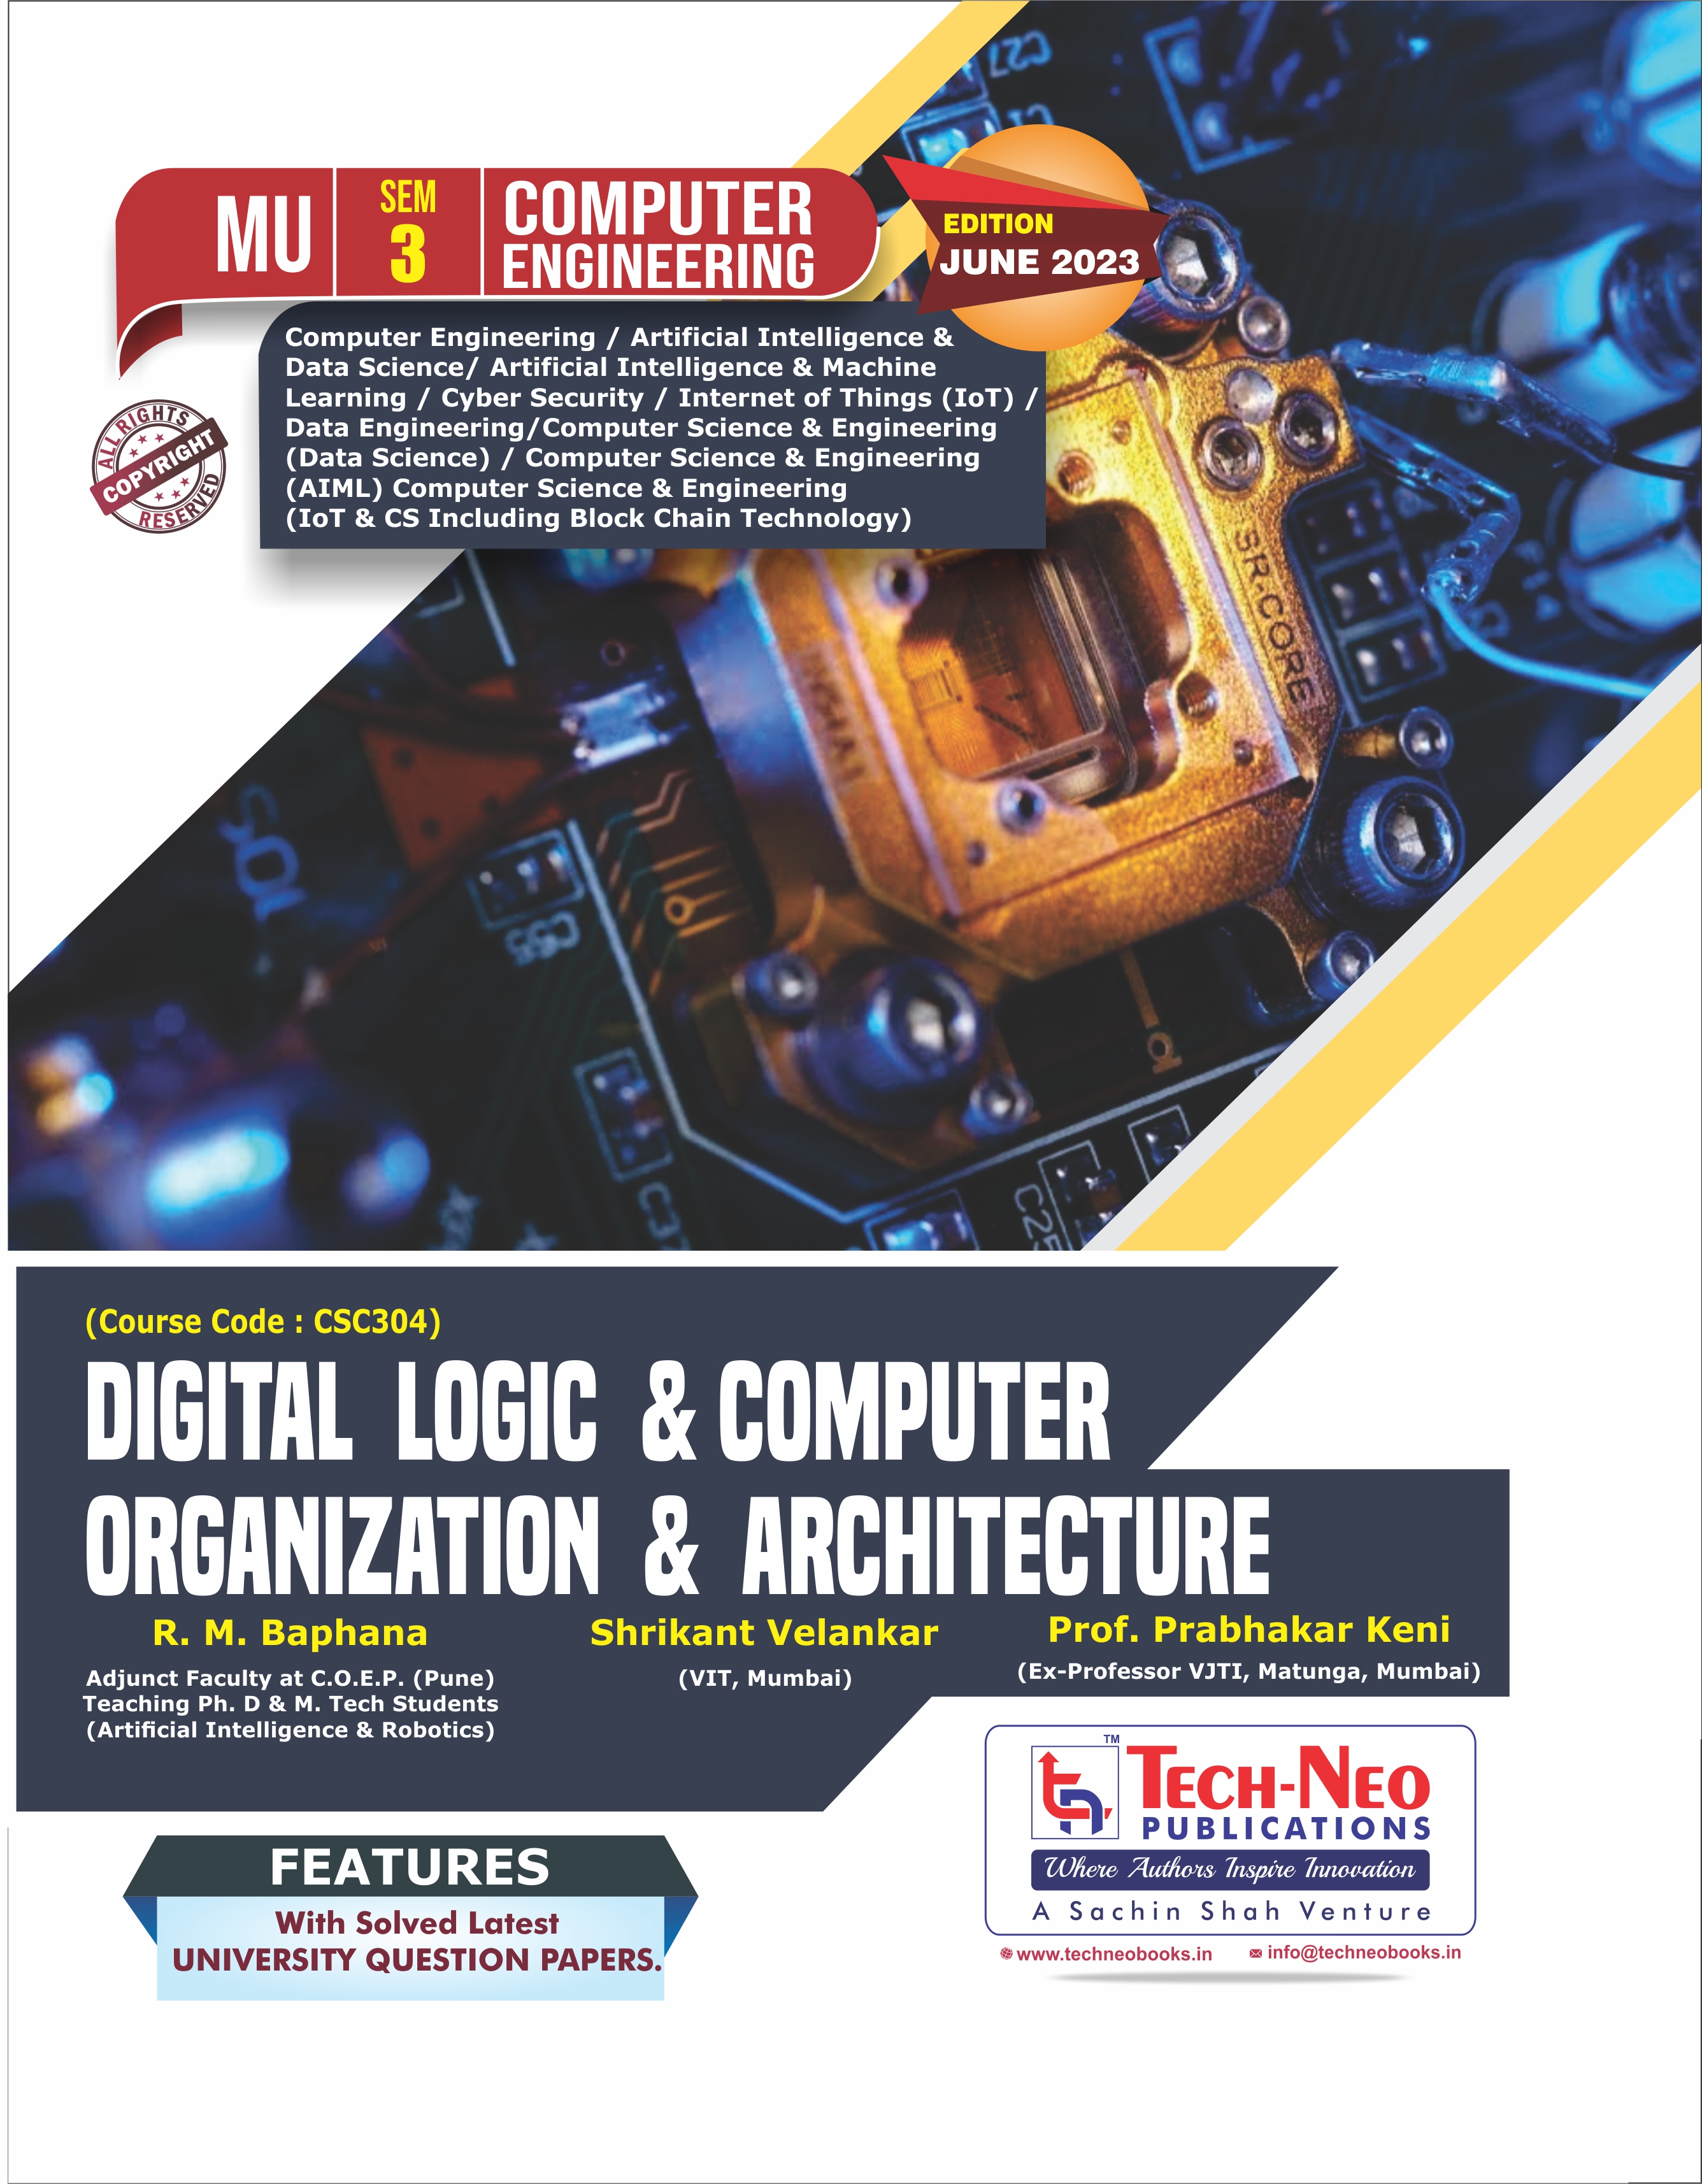 Digital Logic and Computer Organization and Architecture